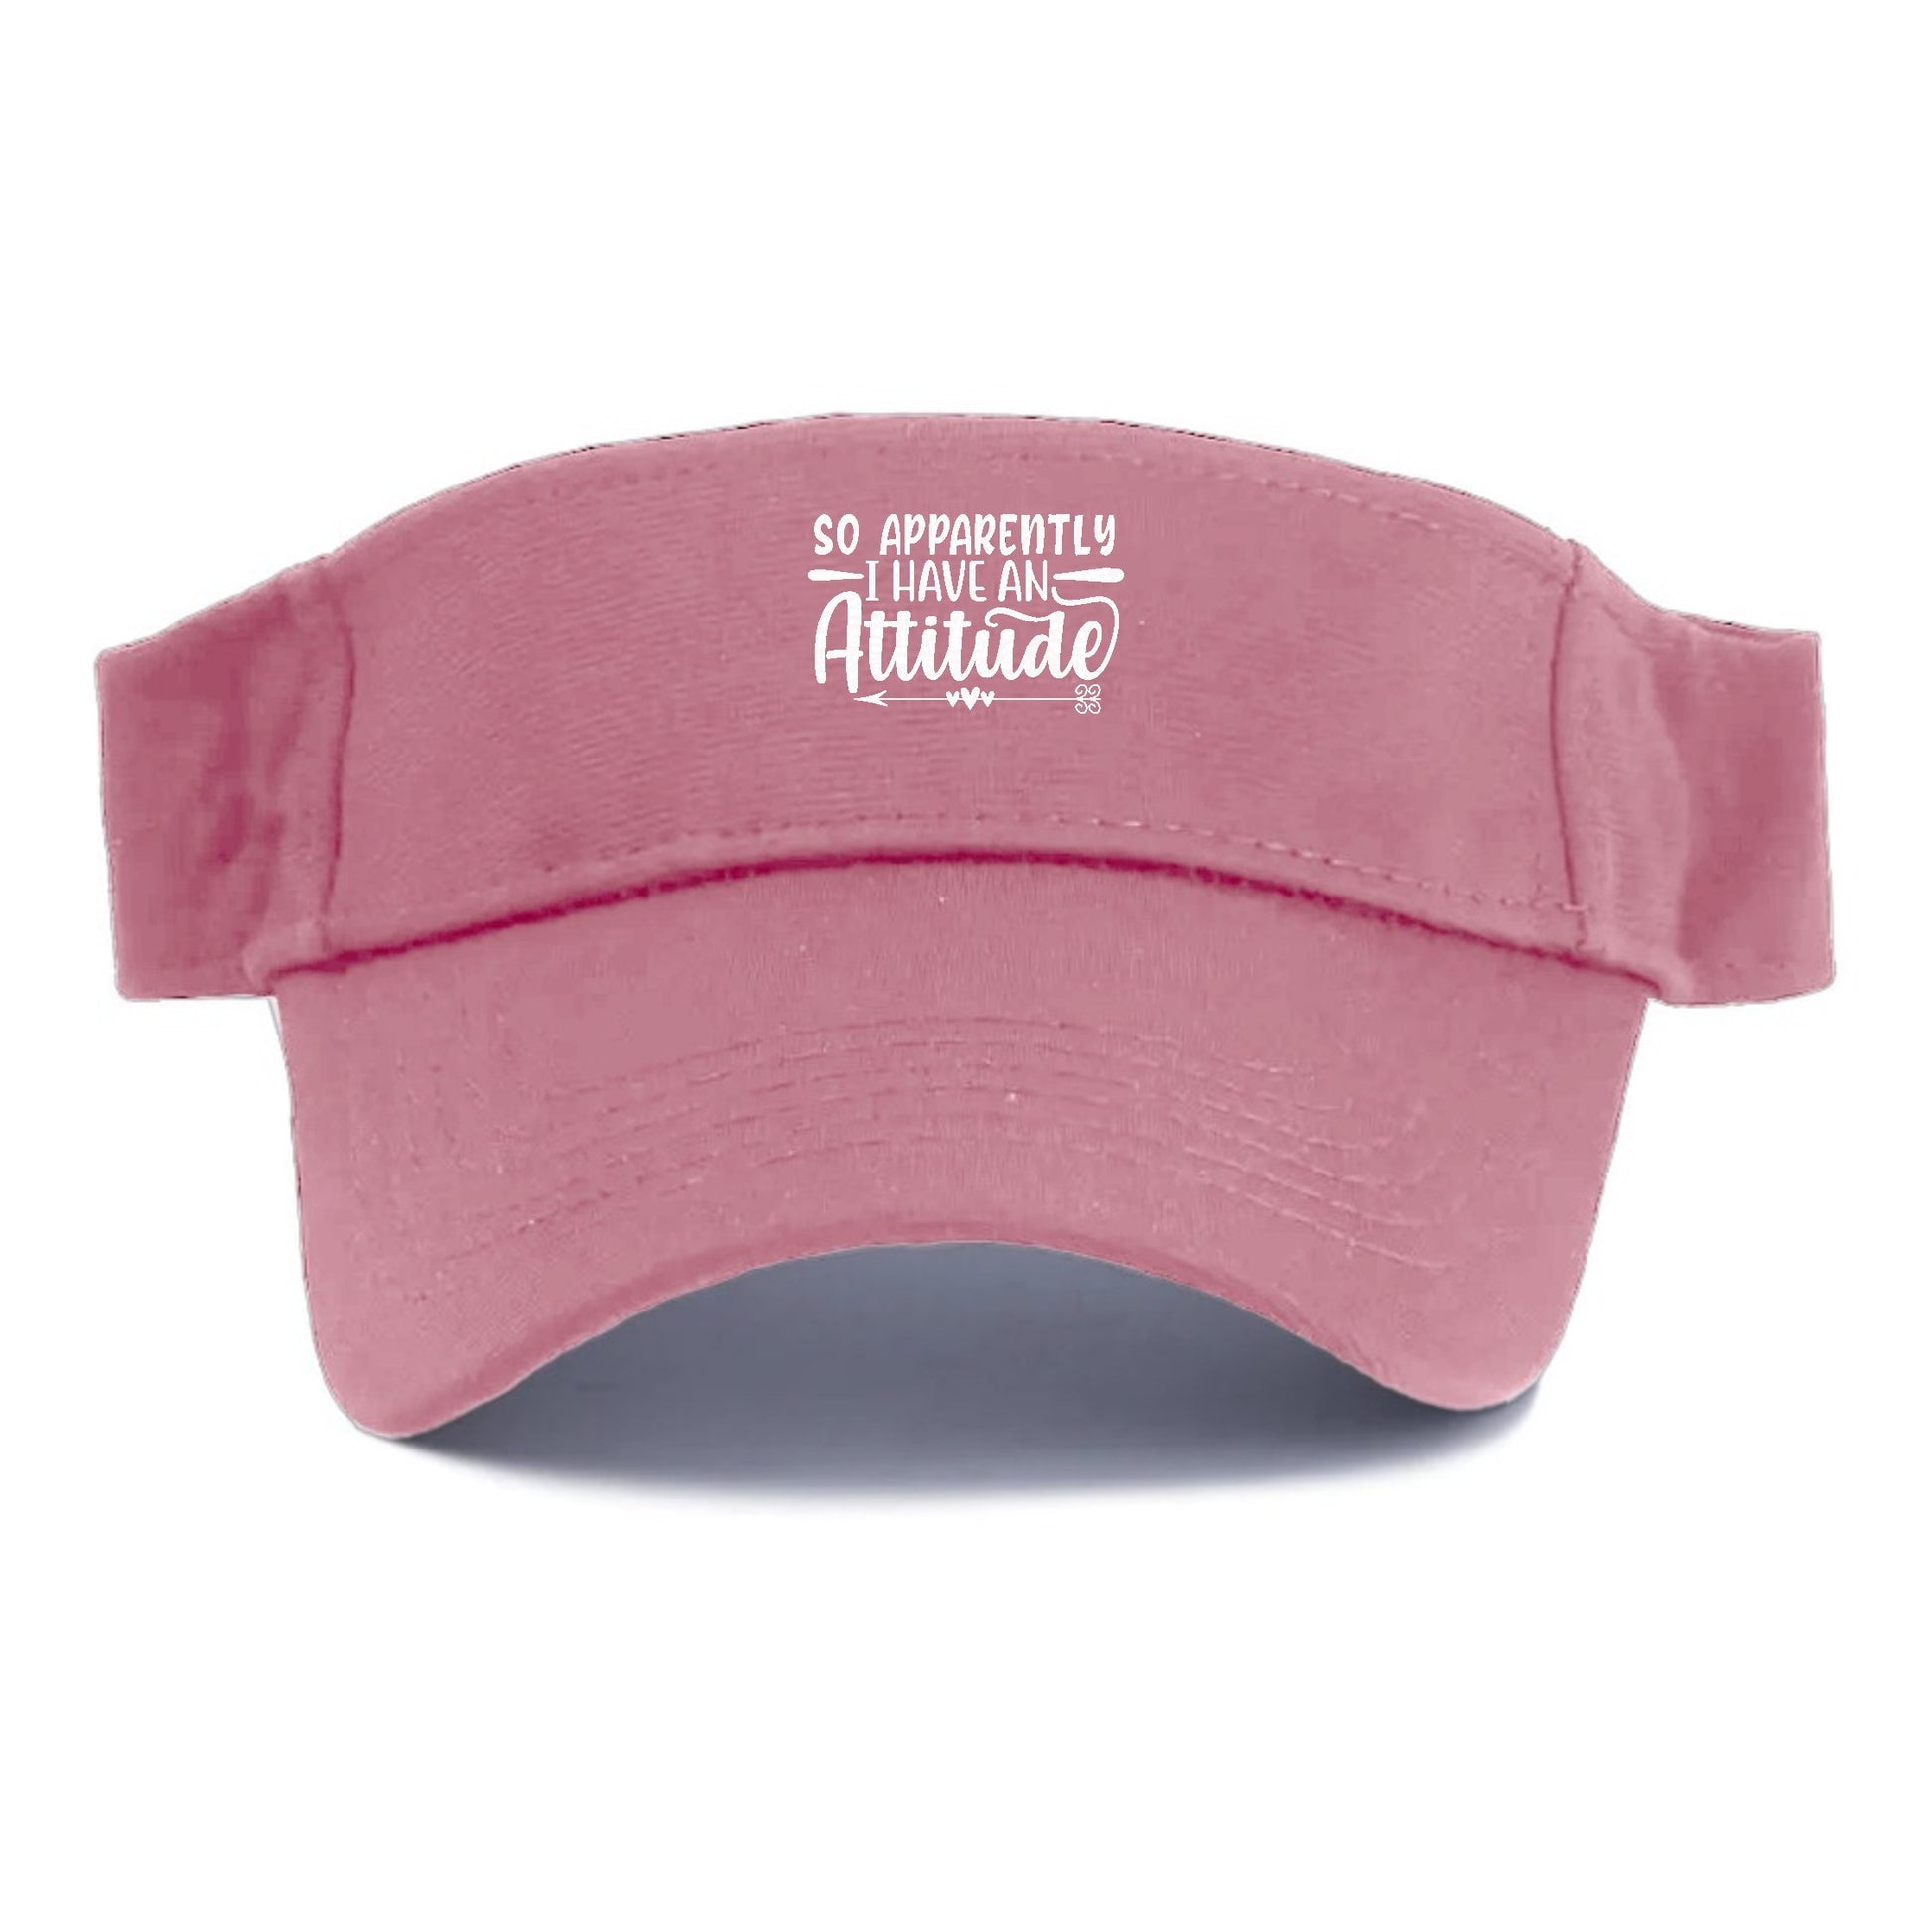 So apparently i have an attitude Hat